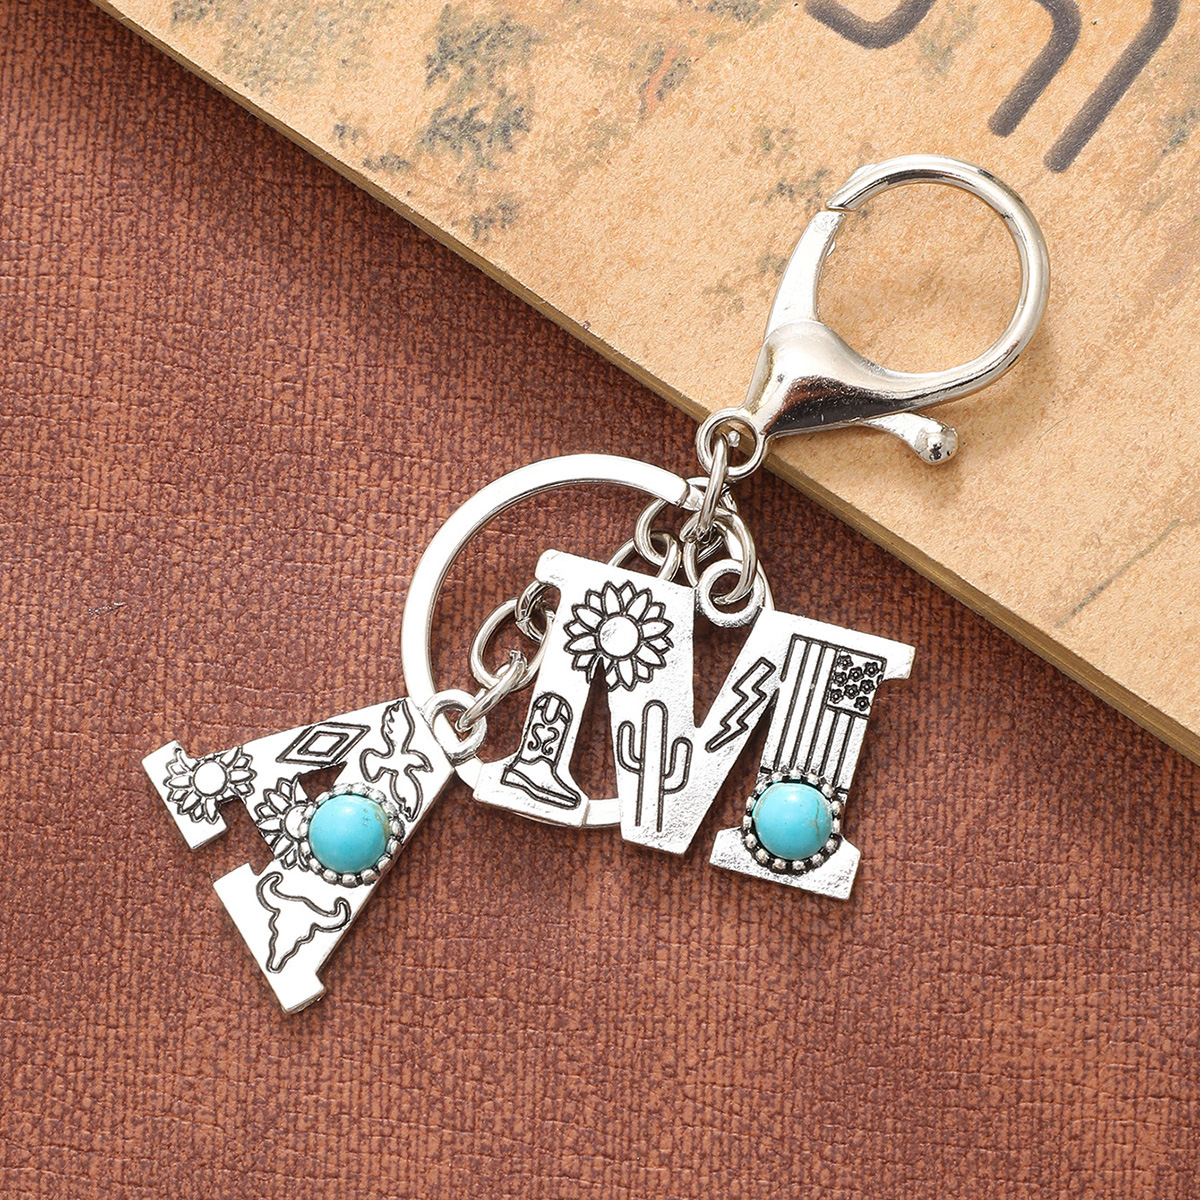 New Alloy Letter Am Retro Europe and America Keychain Cars and Bags Pendant Cross-Border European and American Amazon